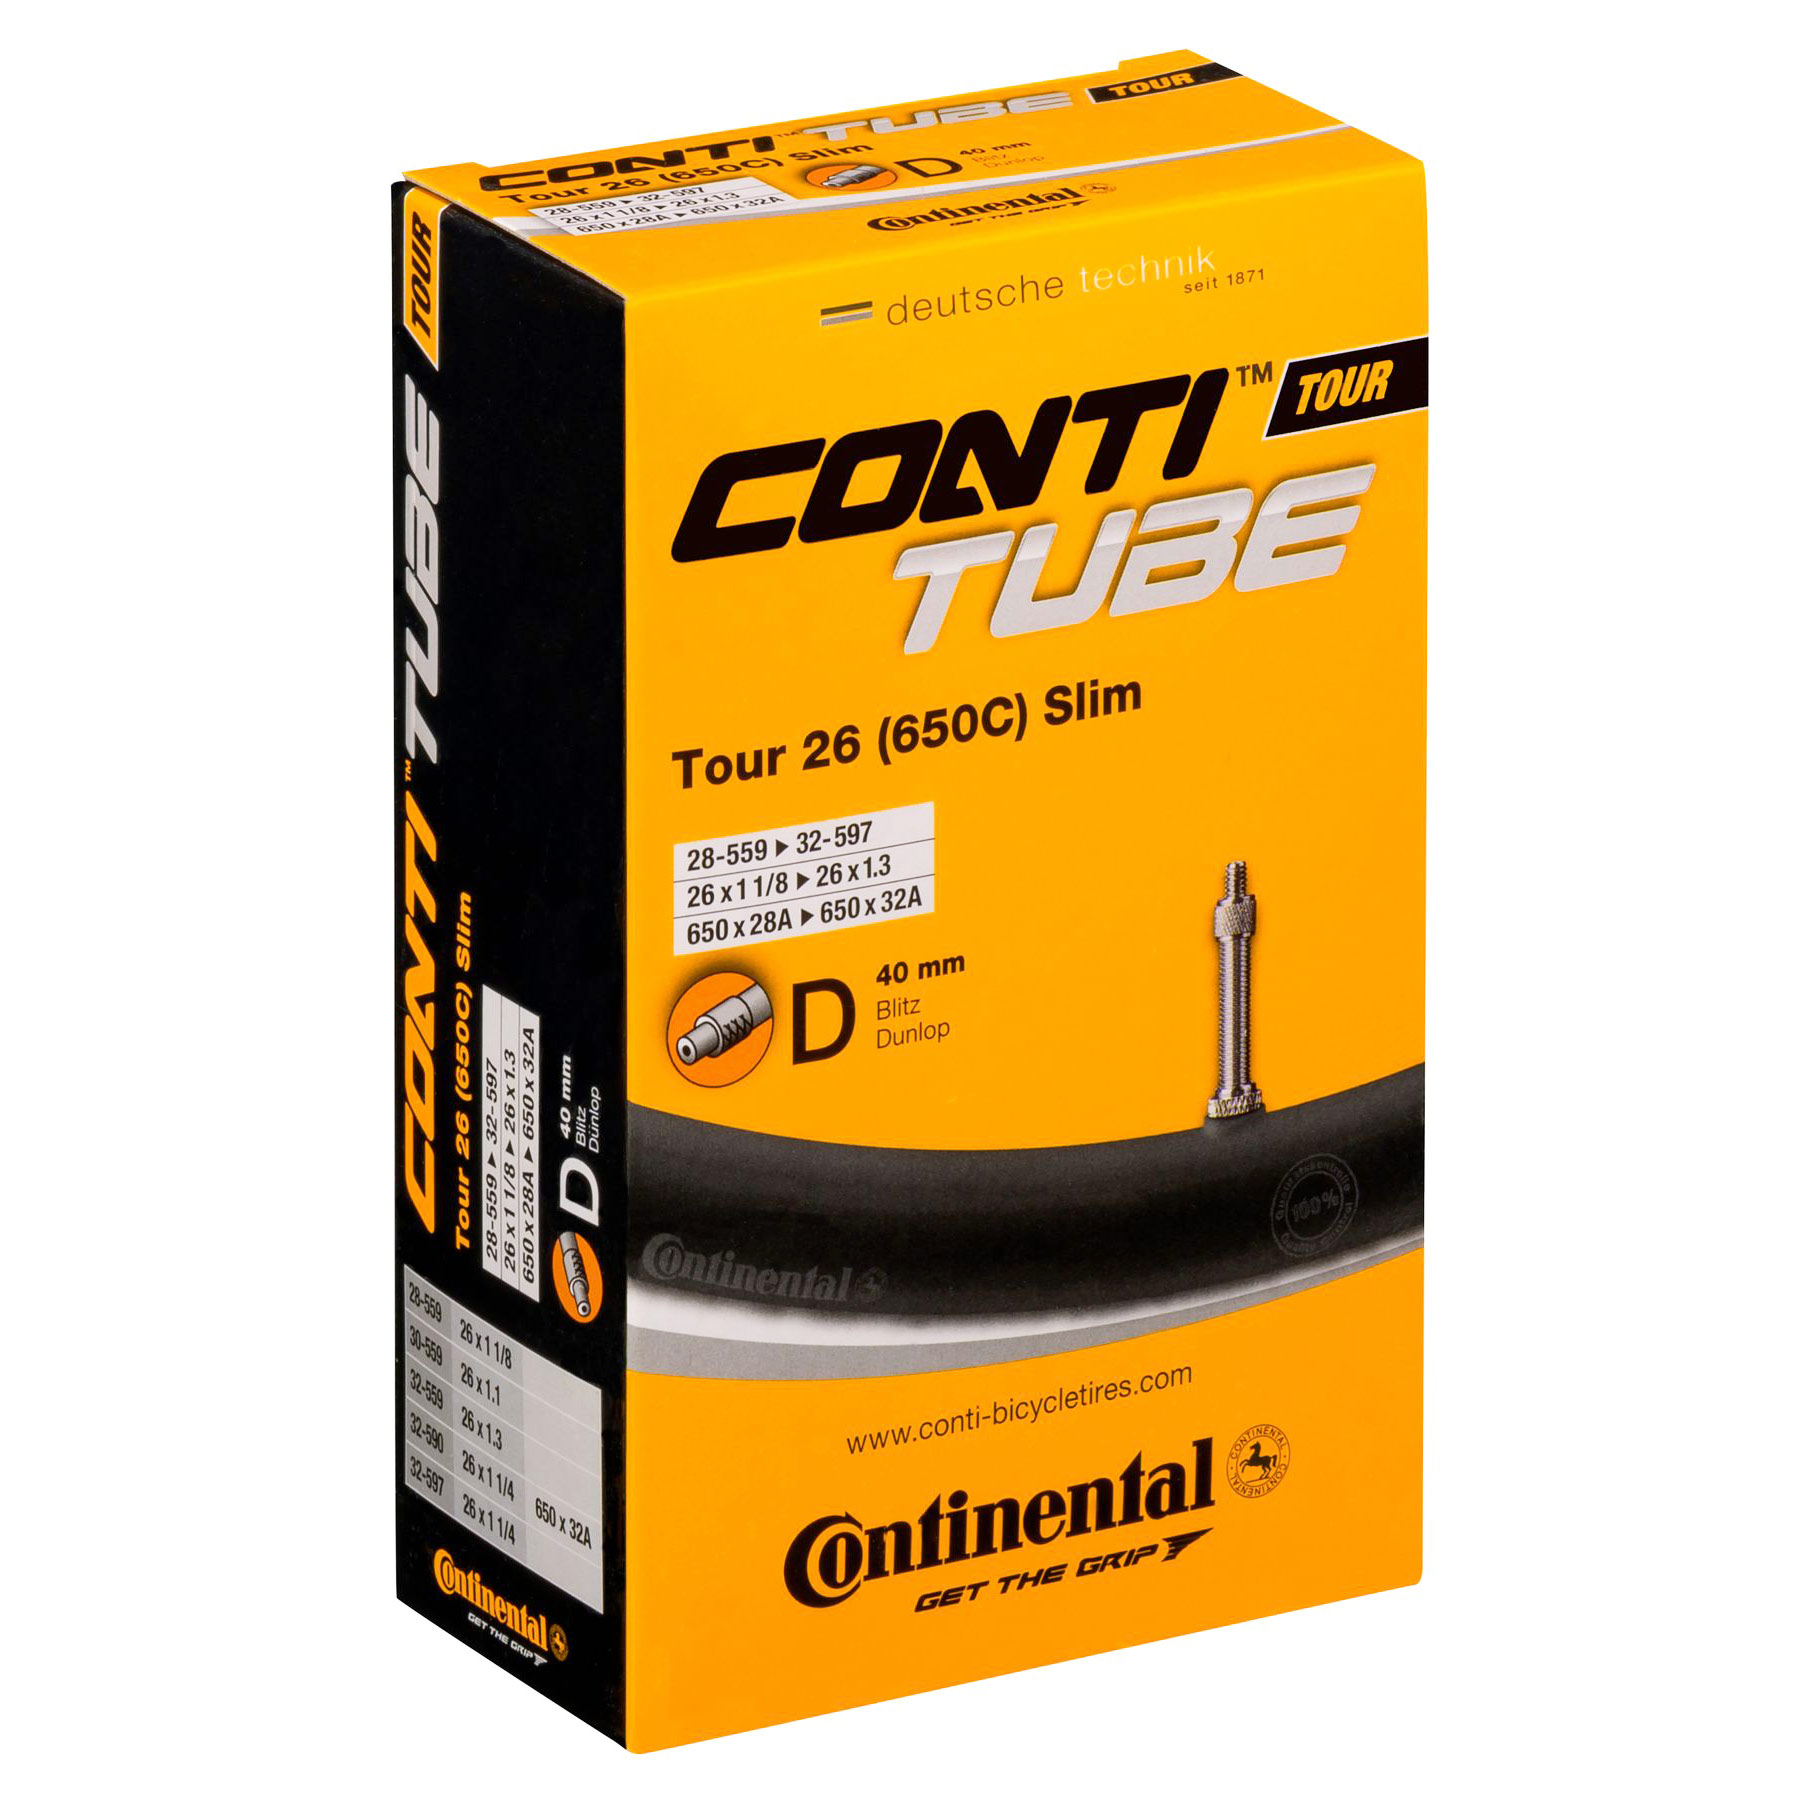 Picture of Continental Tour 26 Slim Tube